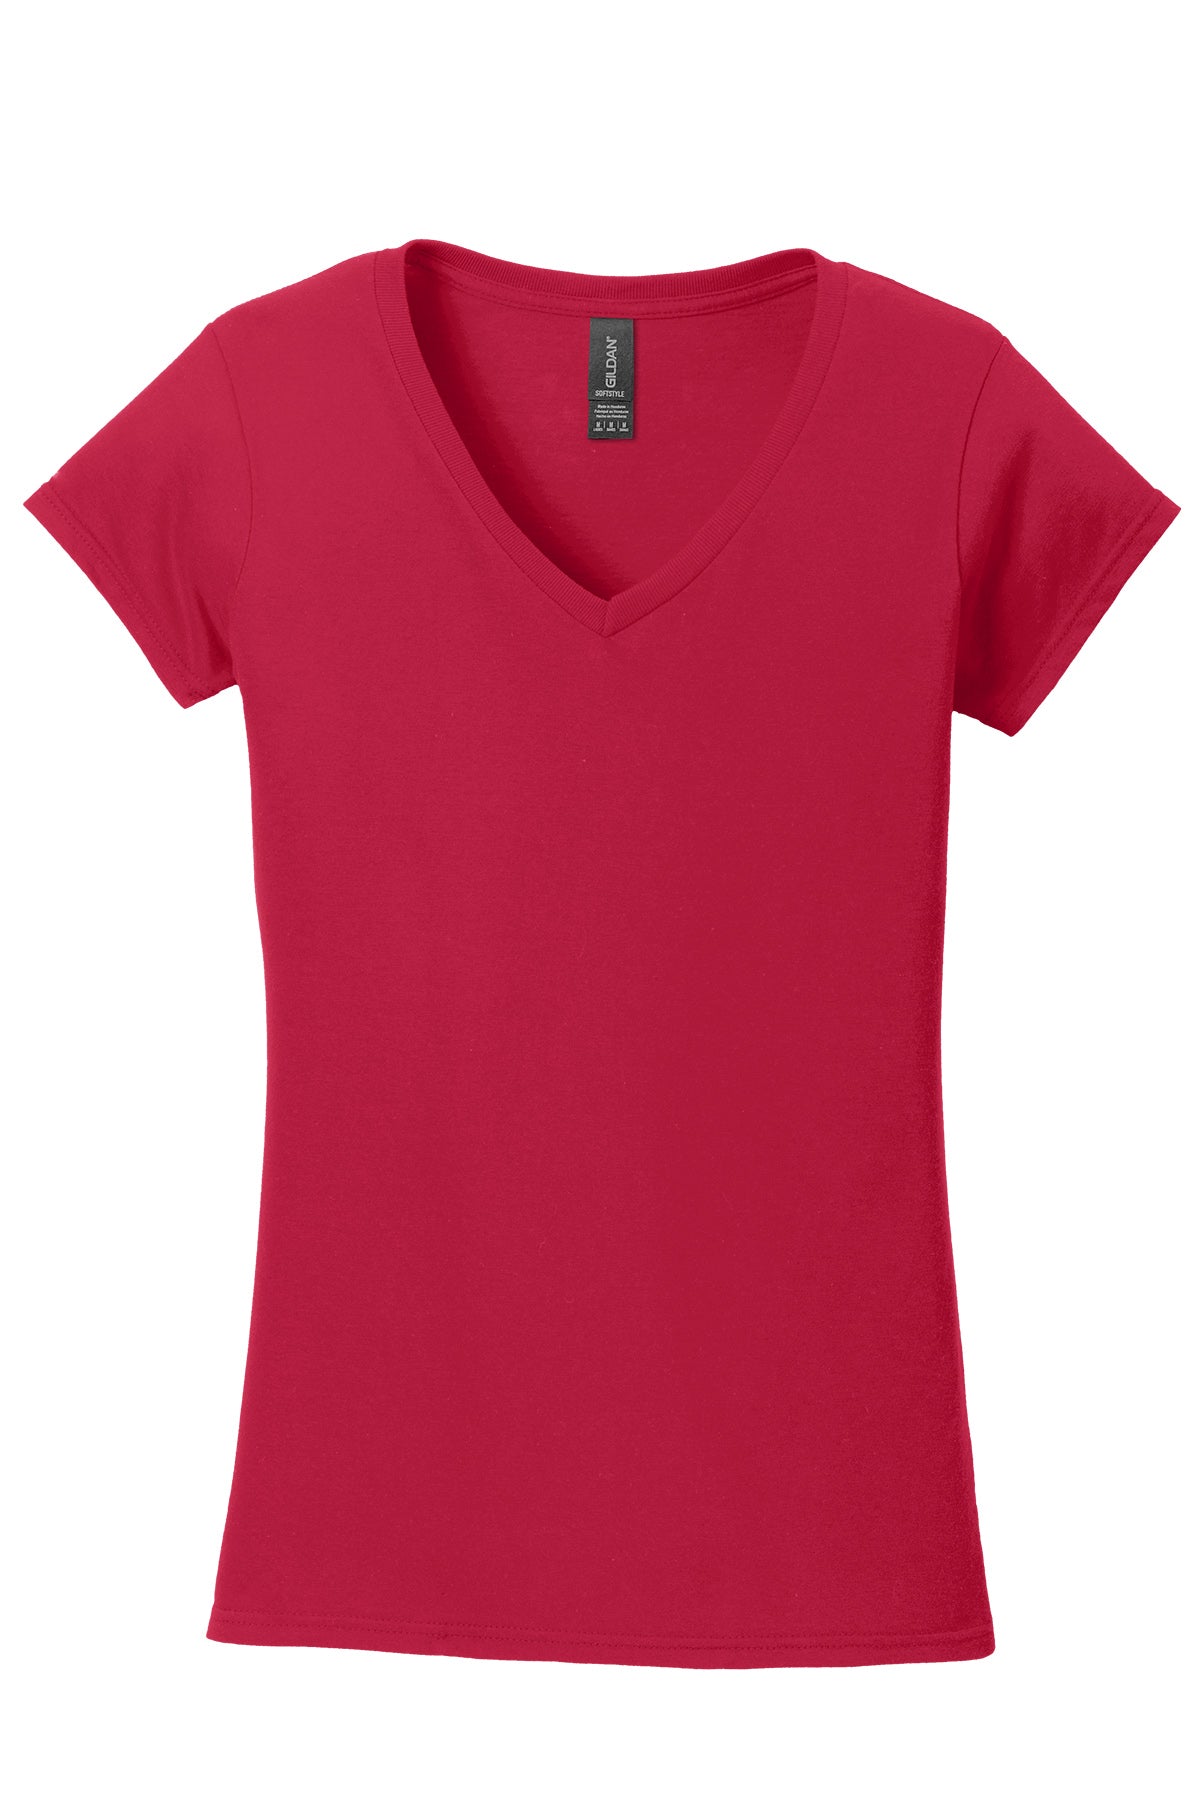 Gildan Softstyle® Ladies 64V00L Fit V-Neck T-Shirt Ad Small / Cherry Red